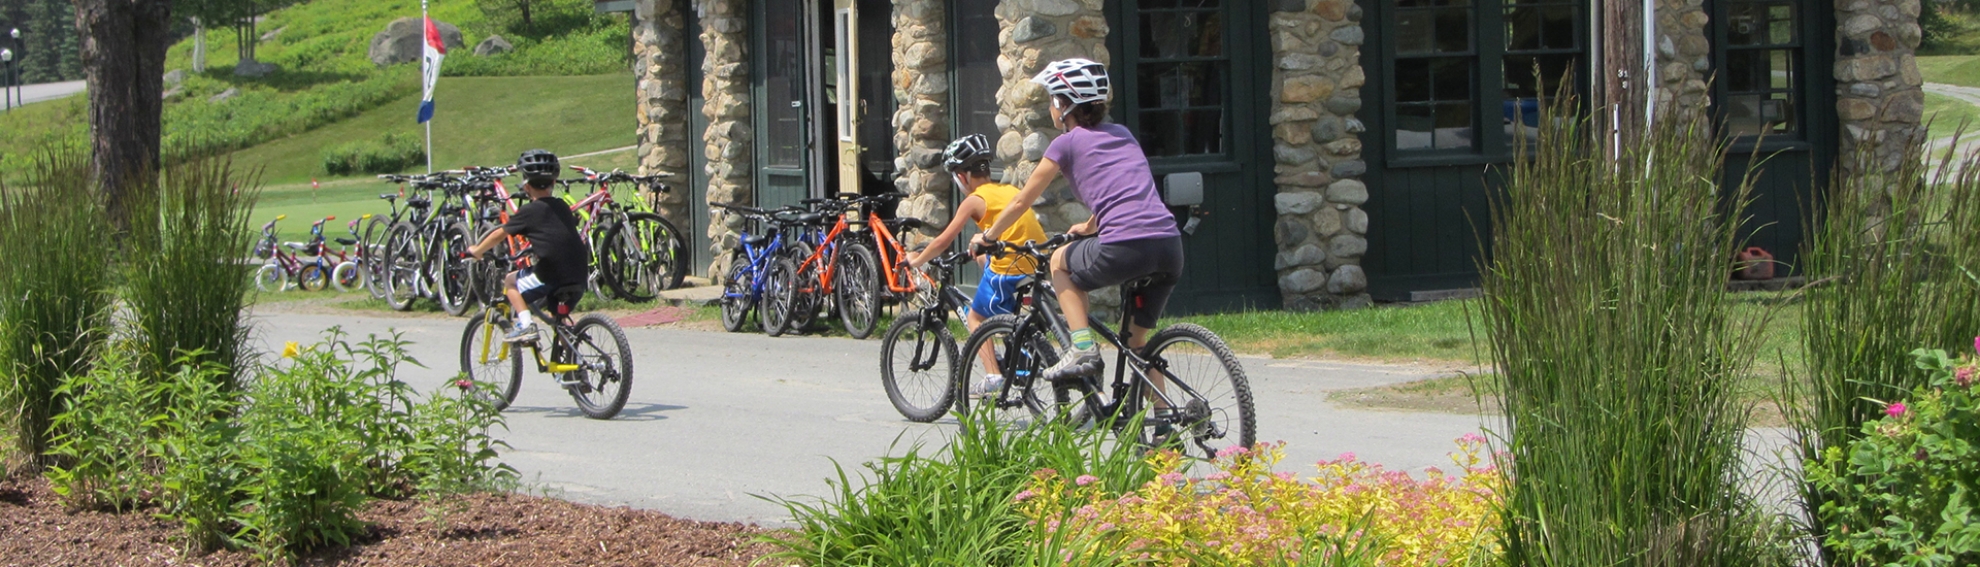 Picture of Full Day- Child Bike Rental